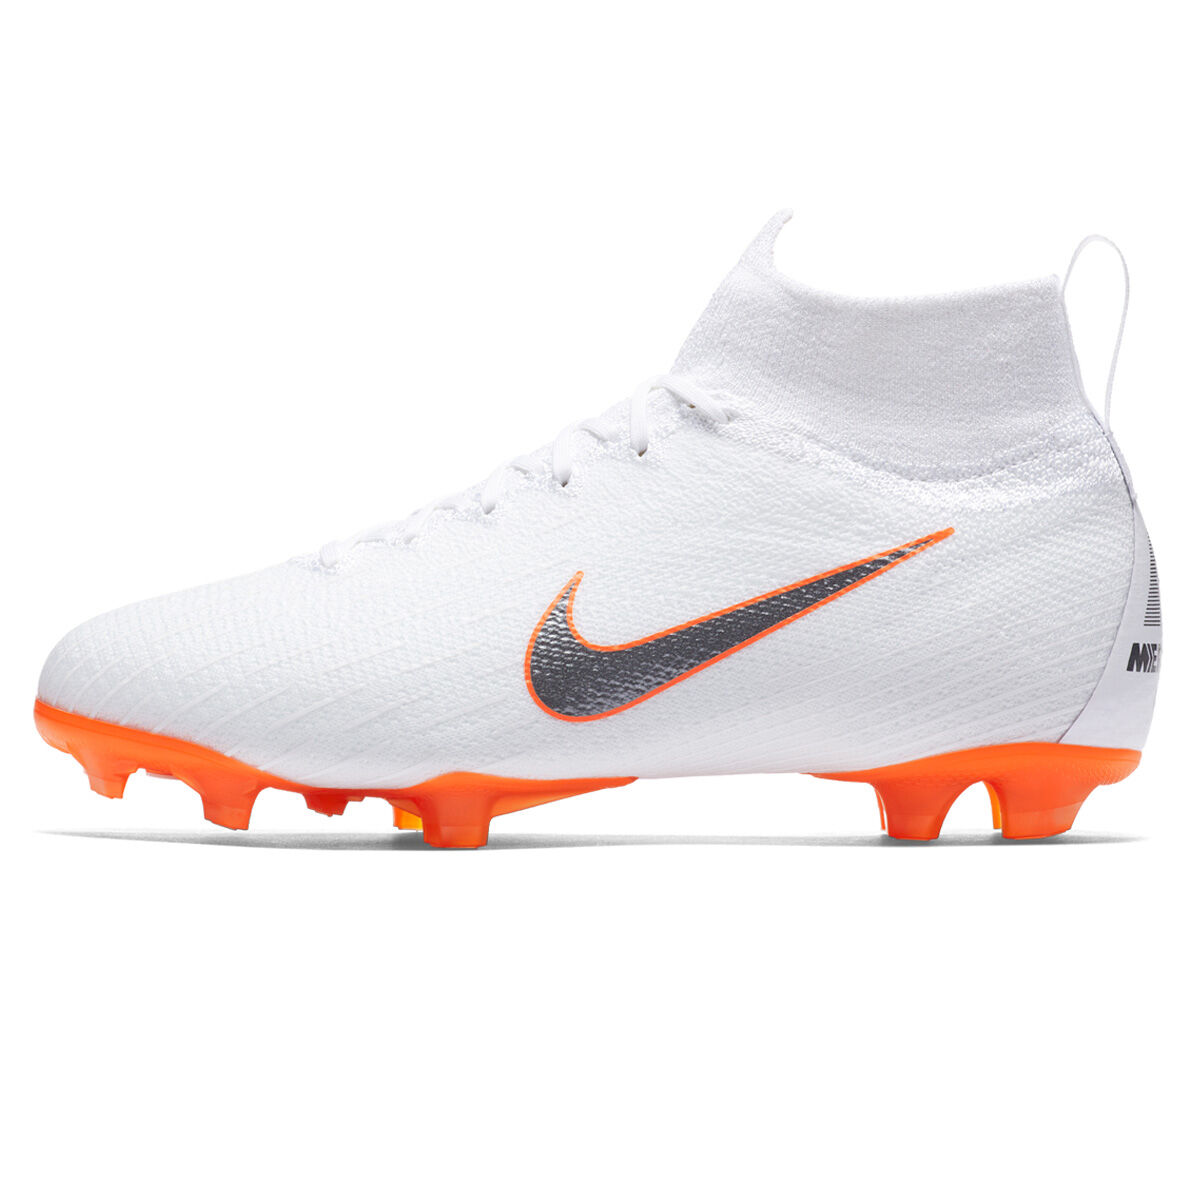 Buy Nike JR Superfly 6 Elite FG Gray Yellow for only 60